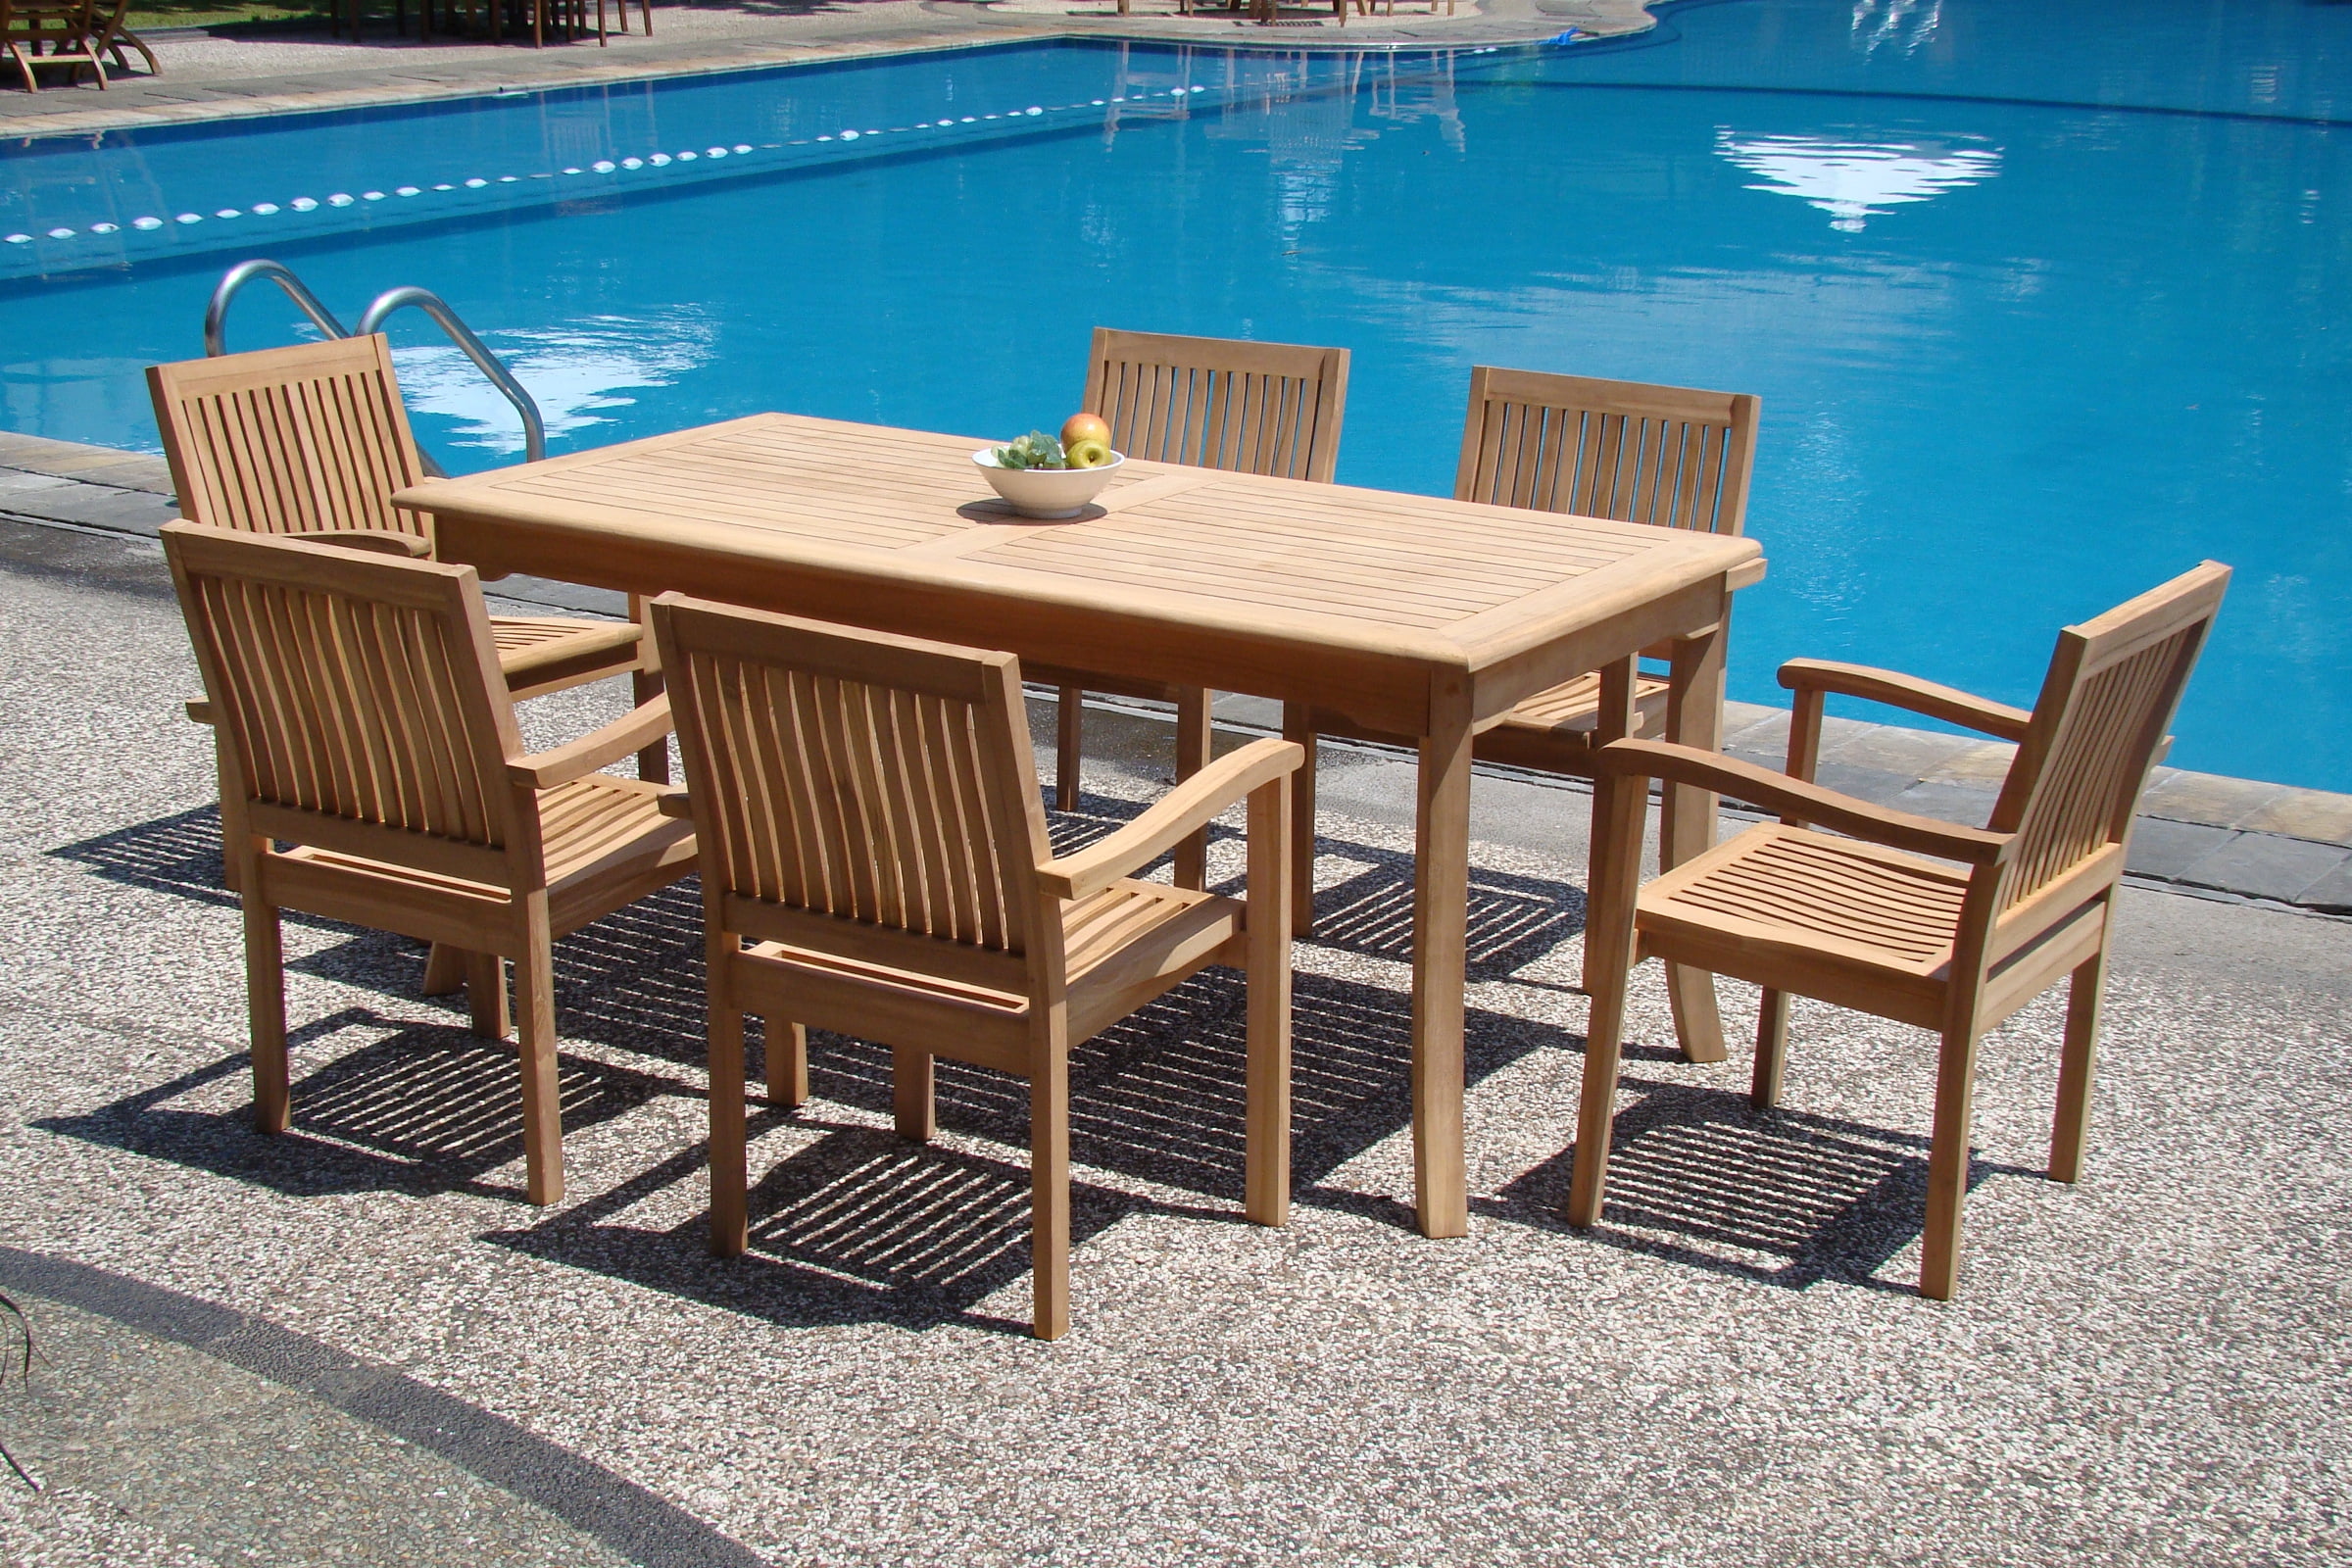 How To Choose Affordable Teak Furniture For Your Patio